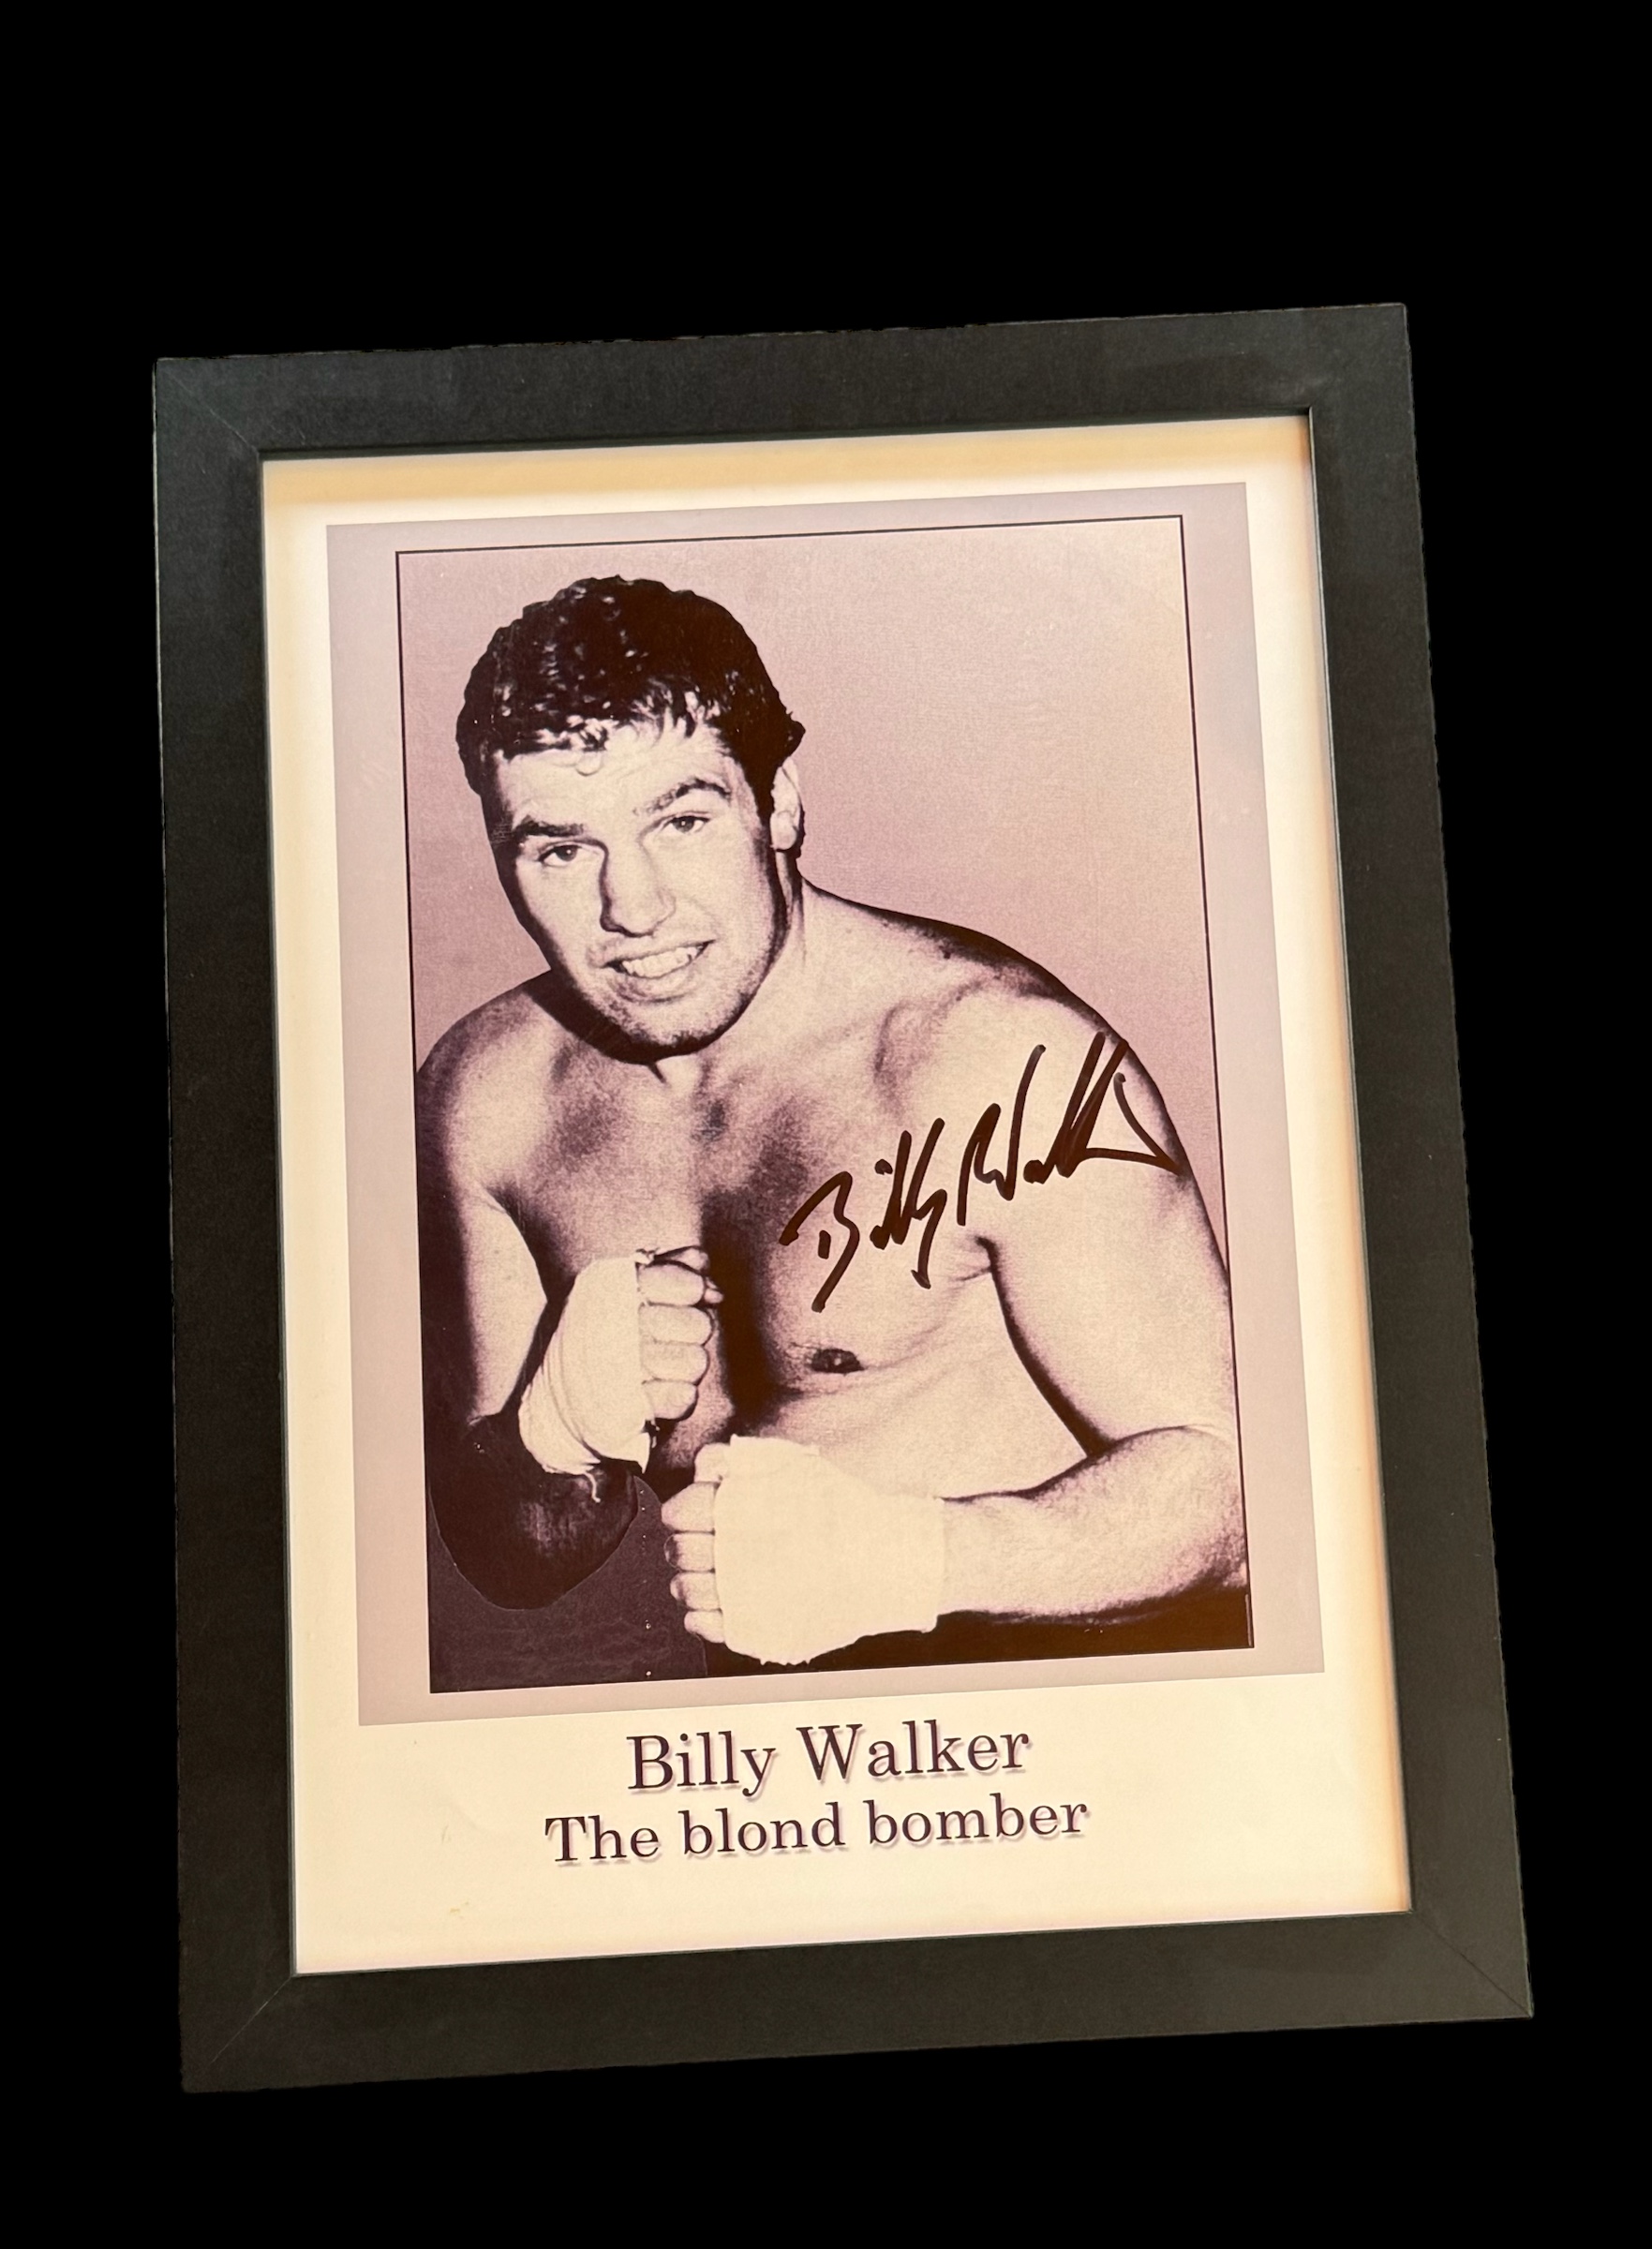 Billy Walker signed 13x10 inch overall framed and mounted black and white photo.